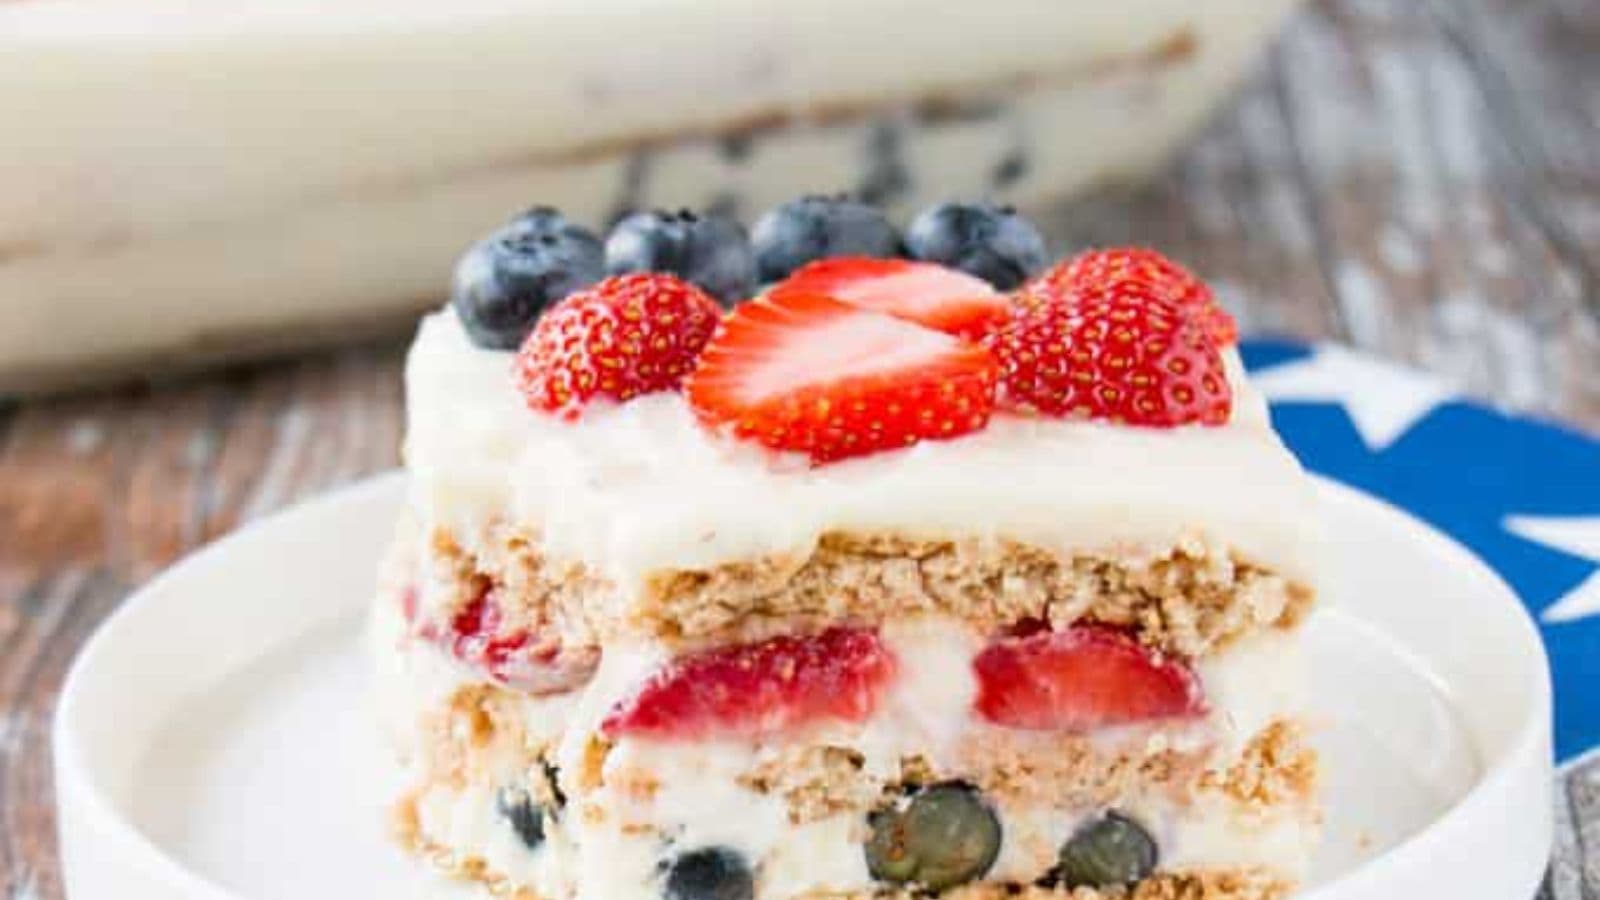 A cake with layers of pudding, graham crackers and fruit.